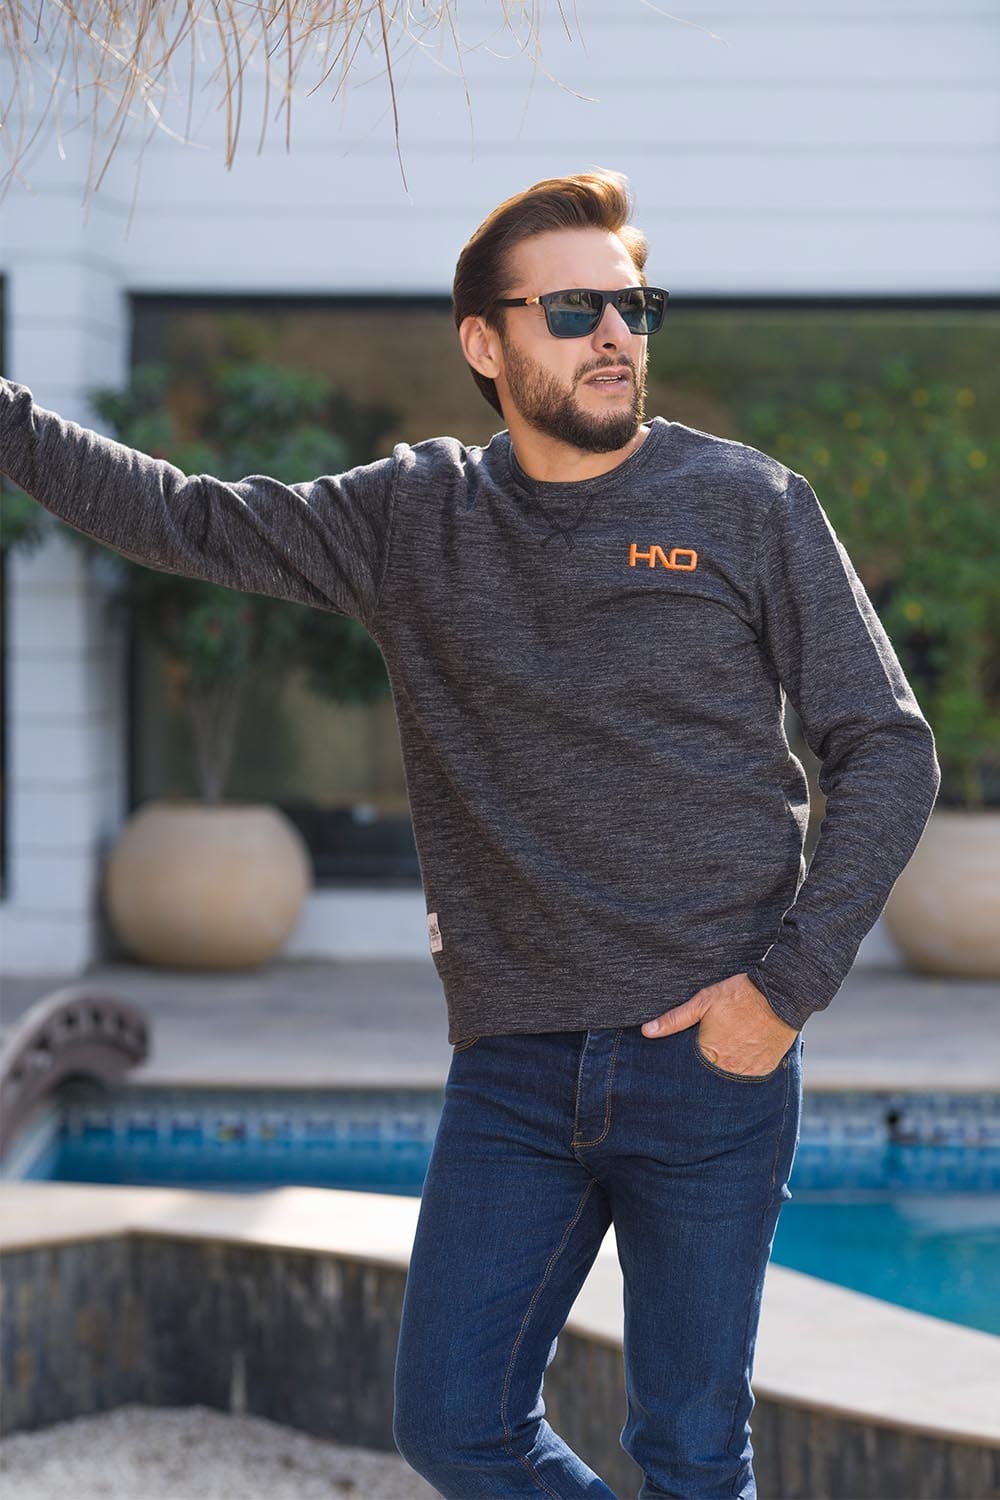 Hope Not Out by Shahid Afridi Men Sweat Shirt ORANGE EMBROIDERED HNO